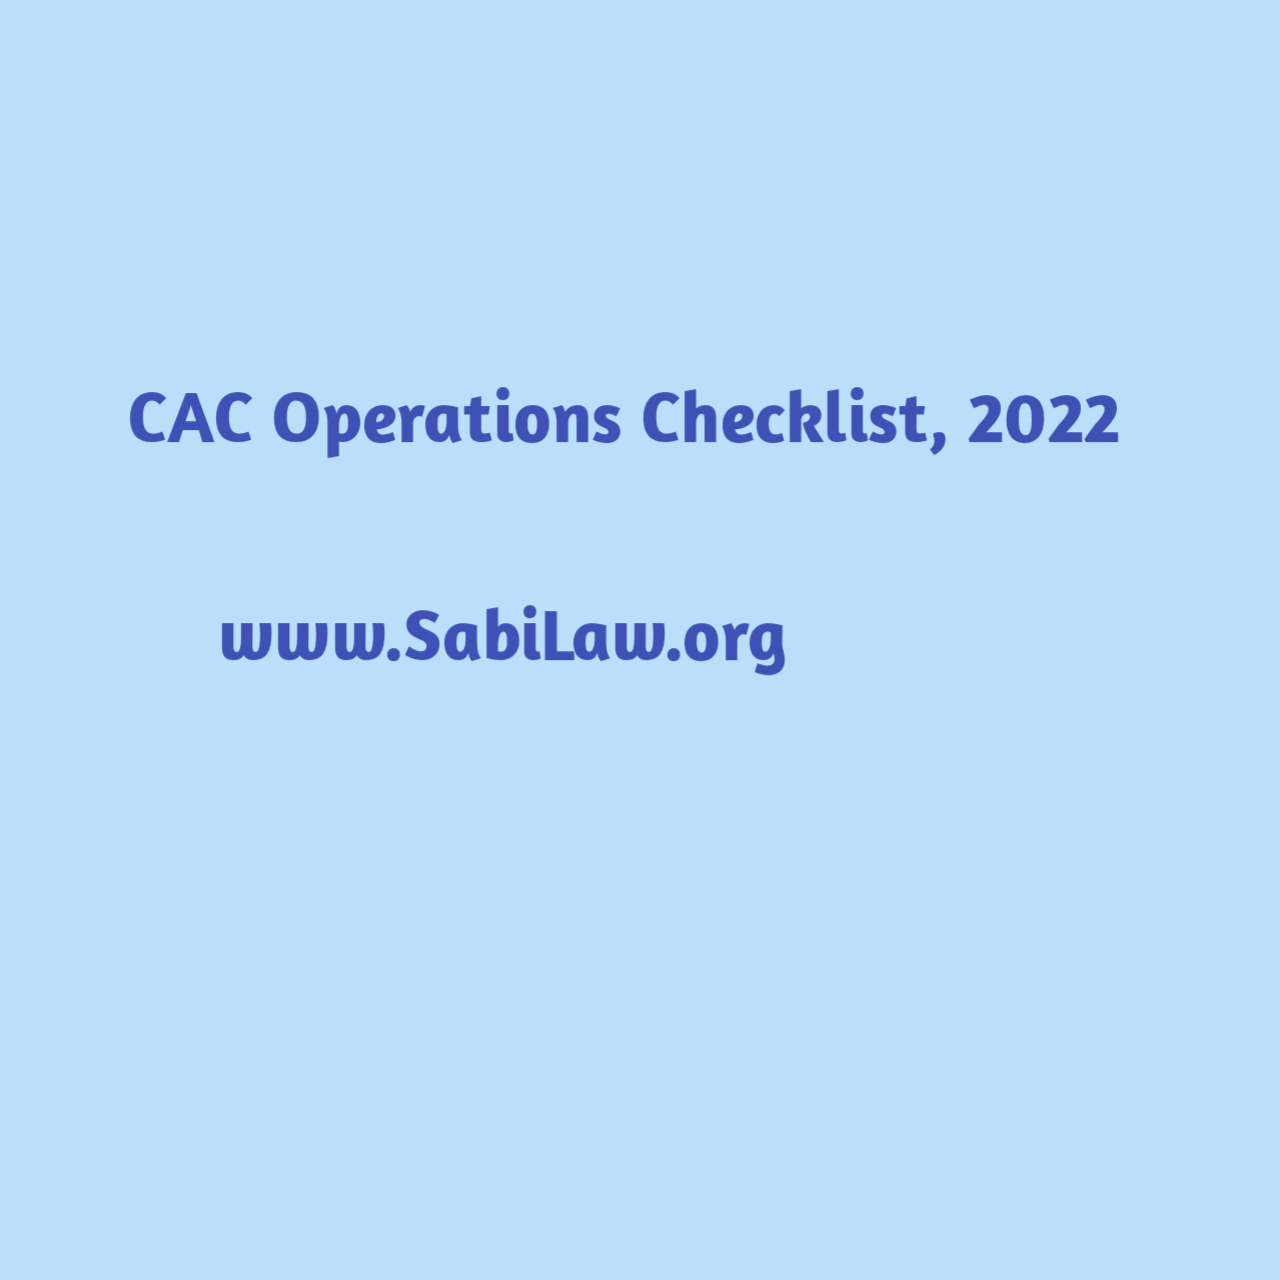 CAC Operations Checklist, 2022